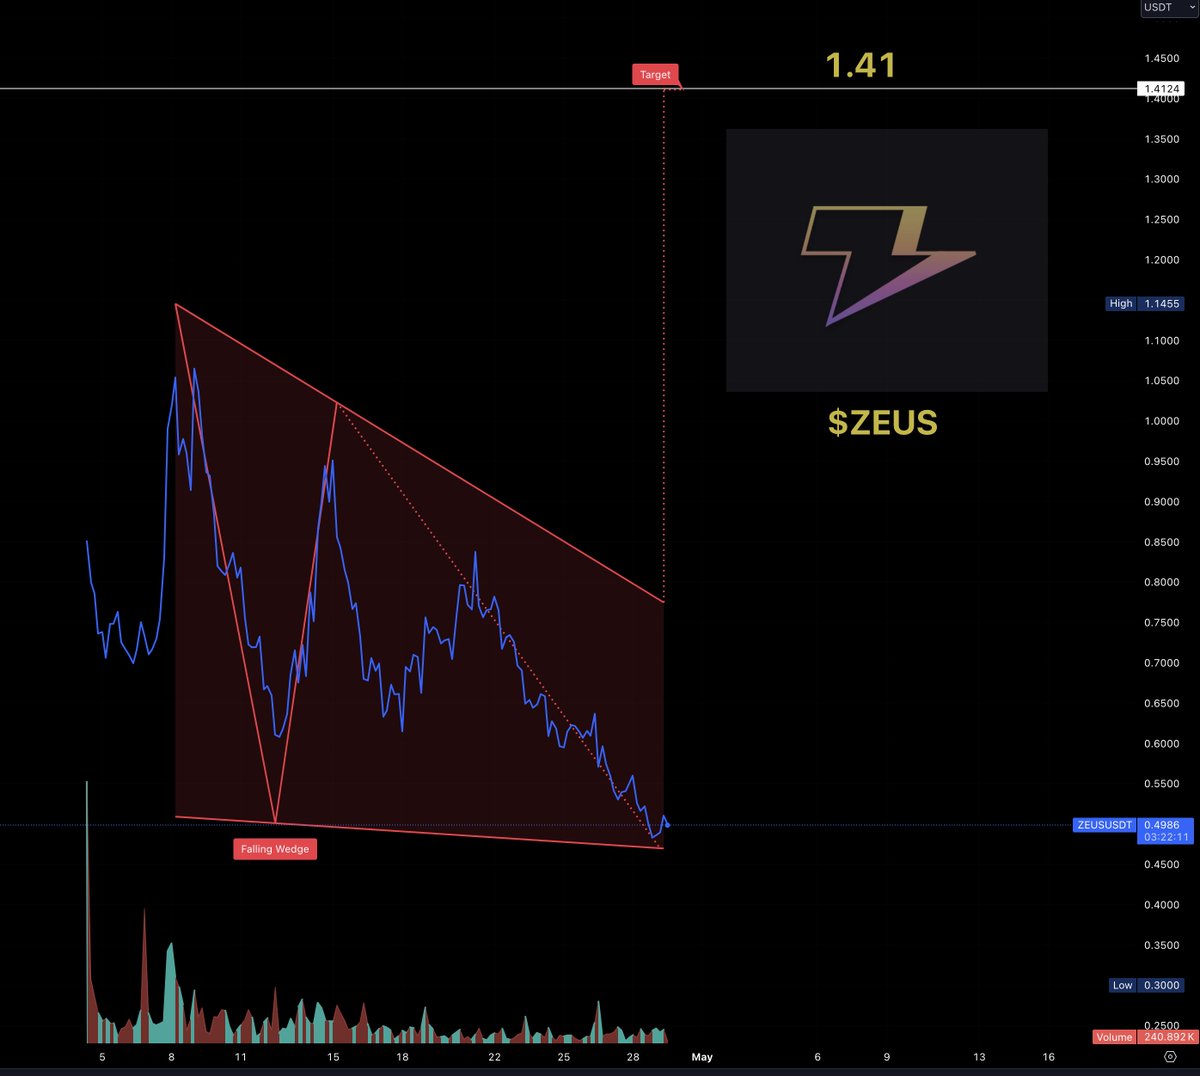 Zeus on @solana initial airdrop selloff appears to be closing. The Falling Wedge on AI is now targeting $1.41 to the upside.

$ZEUS - #Bitcoin to #Solana Made Seamless - CrossChain Communication Layer Built on SVM

@ZeusNetworkHQ zeusnetwork.xyz